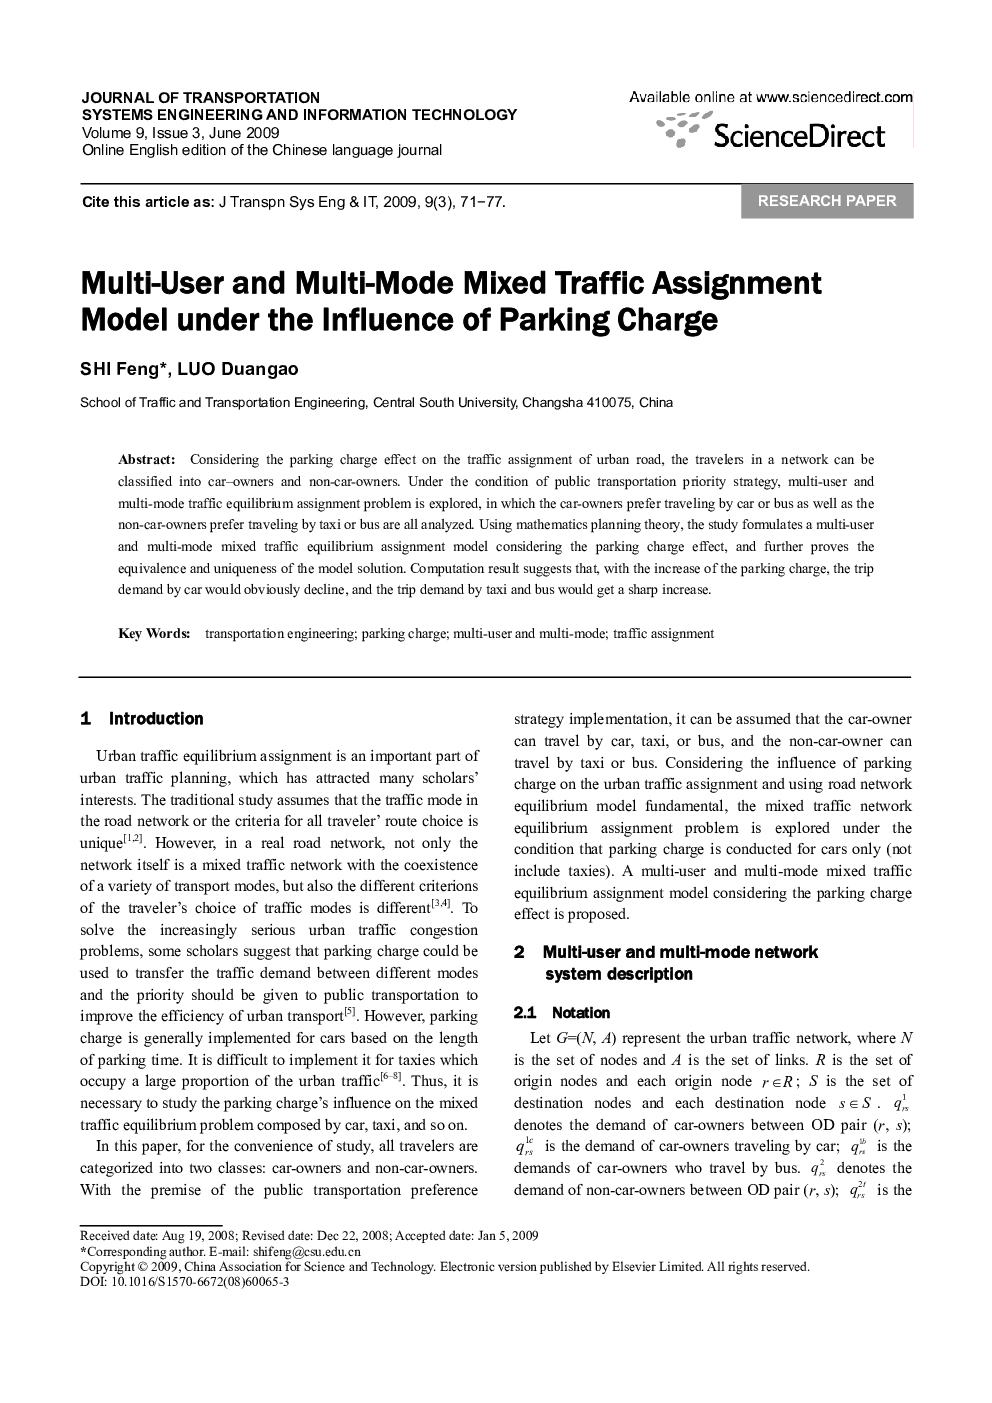 Multi-User and Multi-Mode Mixed Traffic Assignment Model under the Influence of Parking Charge